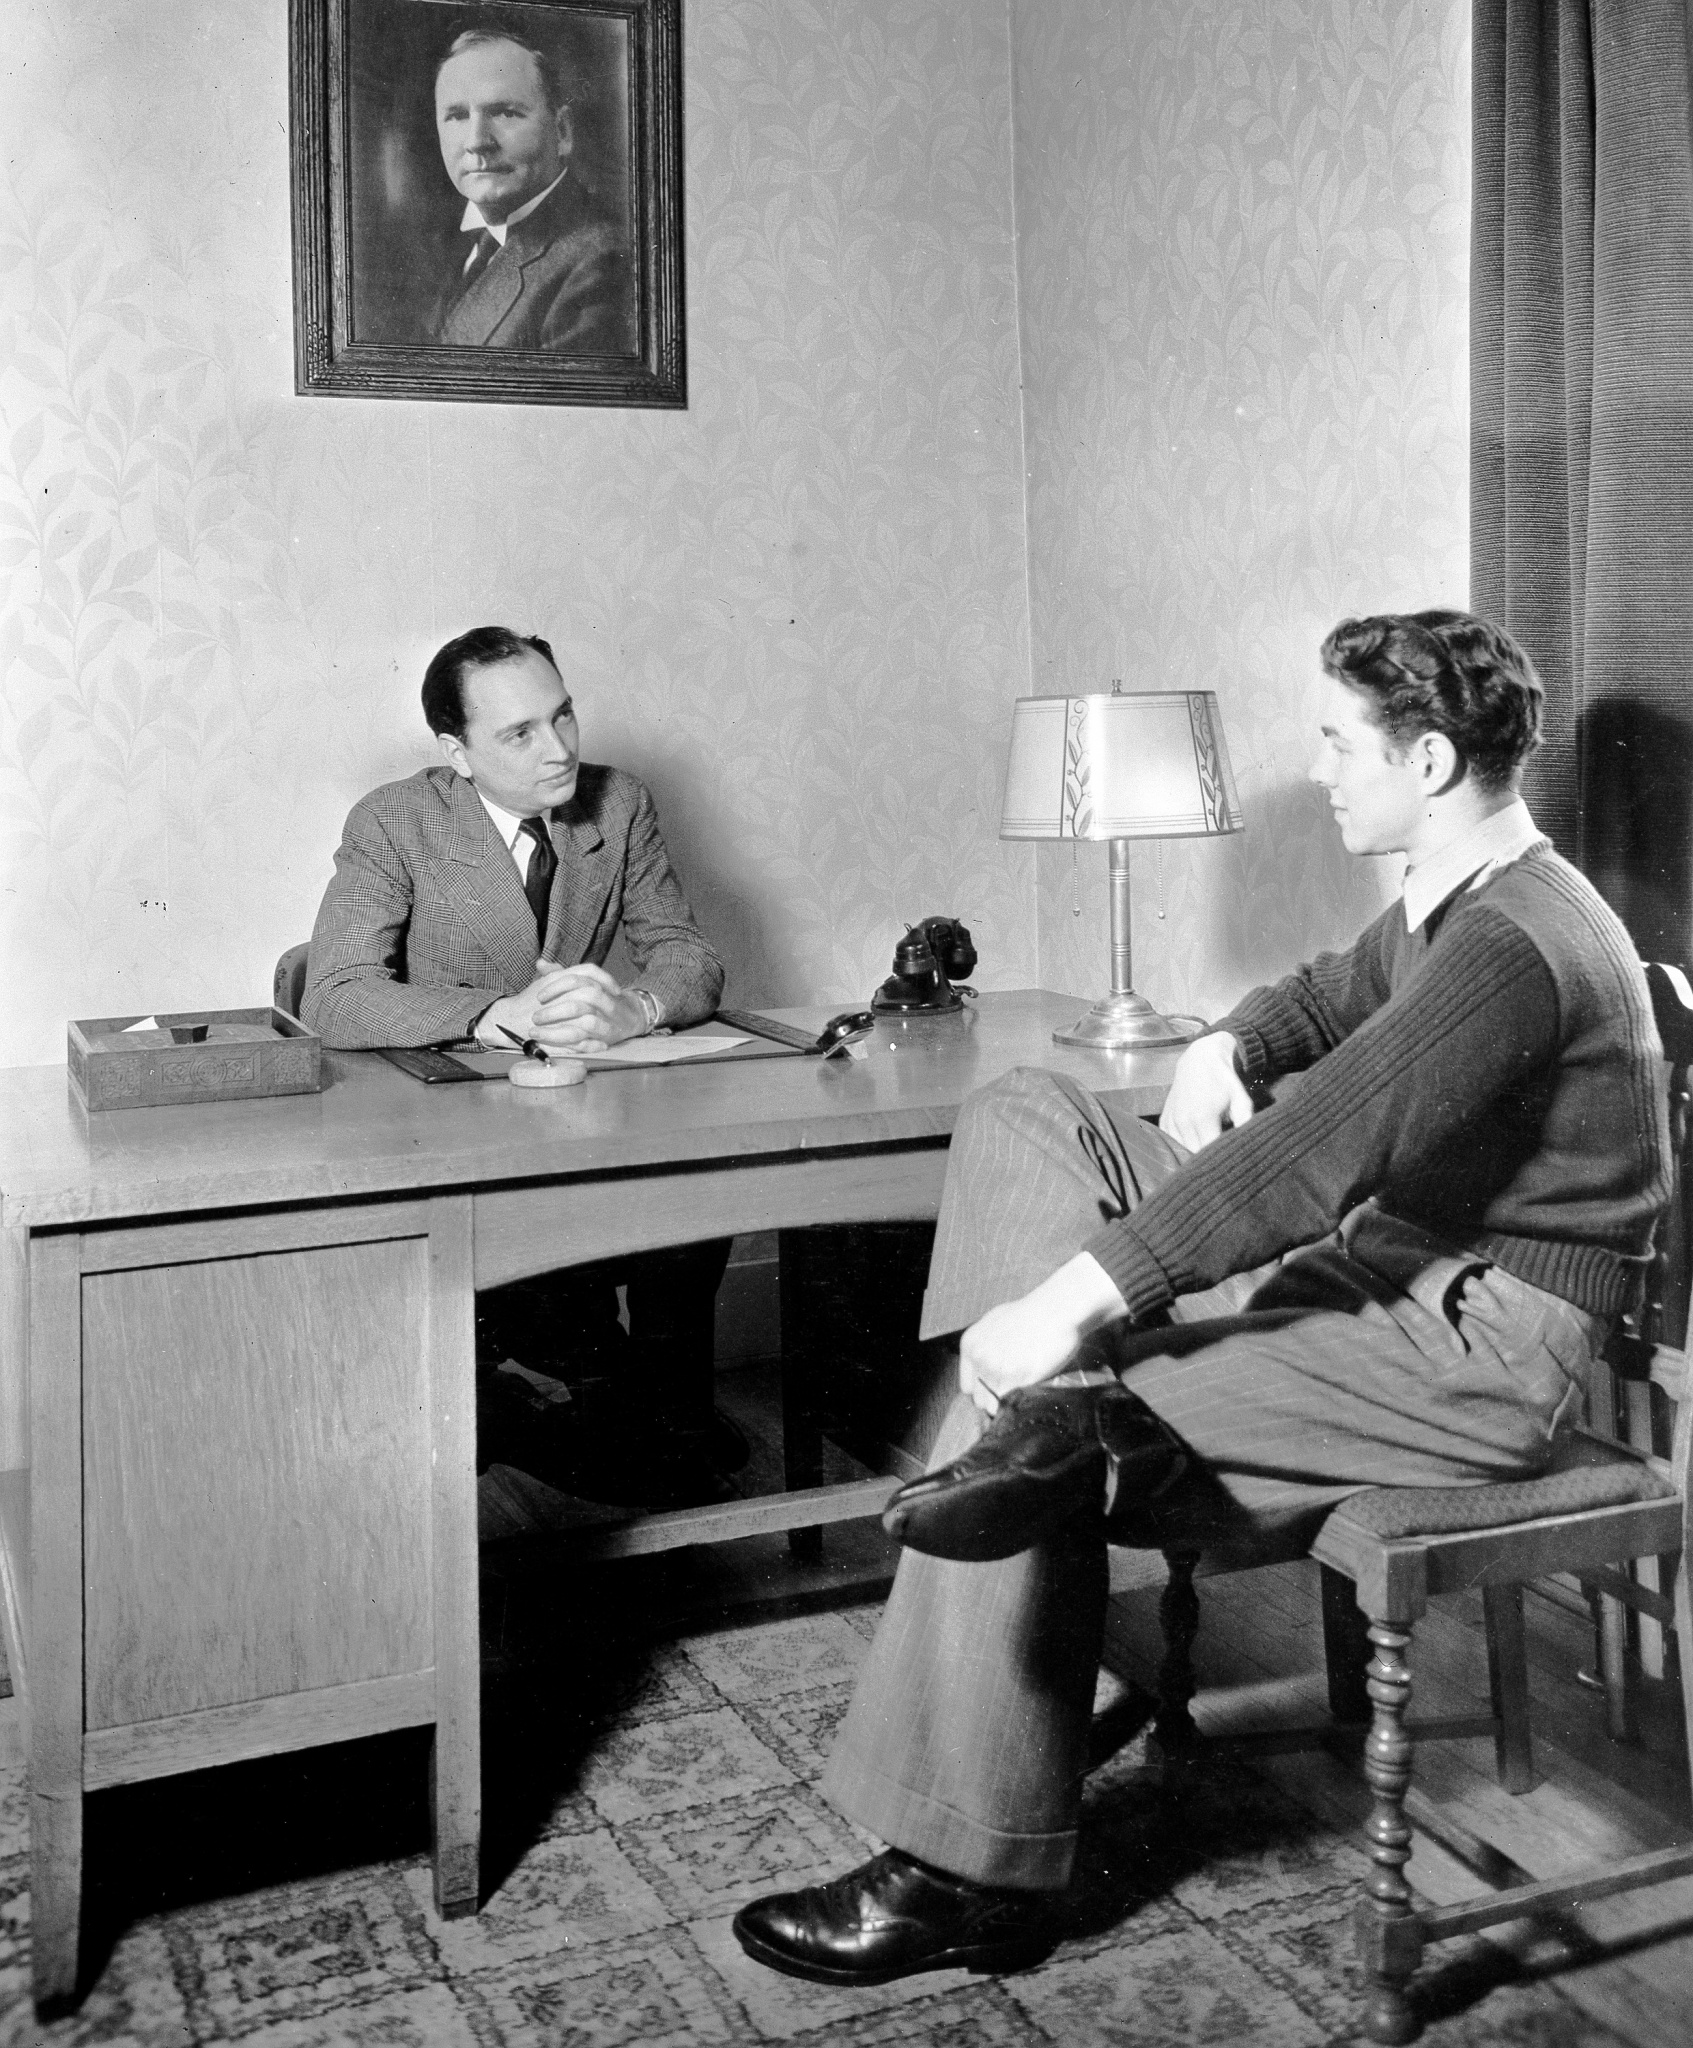 Photo of Bob Jones Jr. in his office with a student, 1935